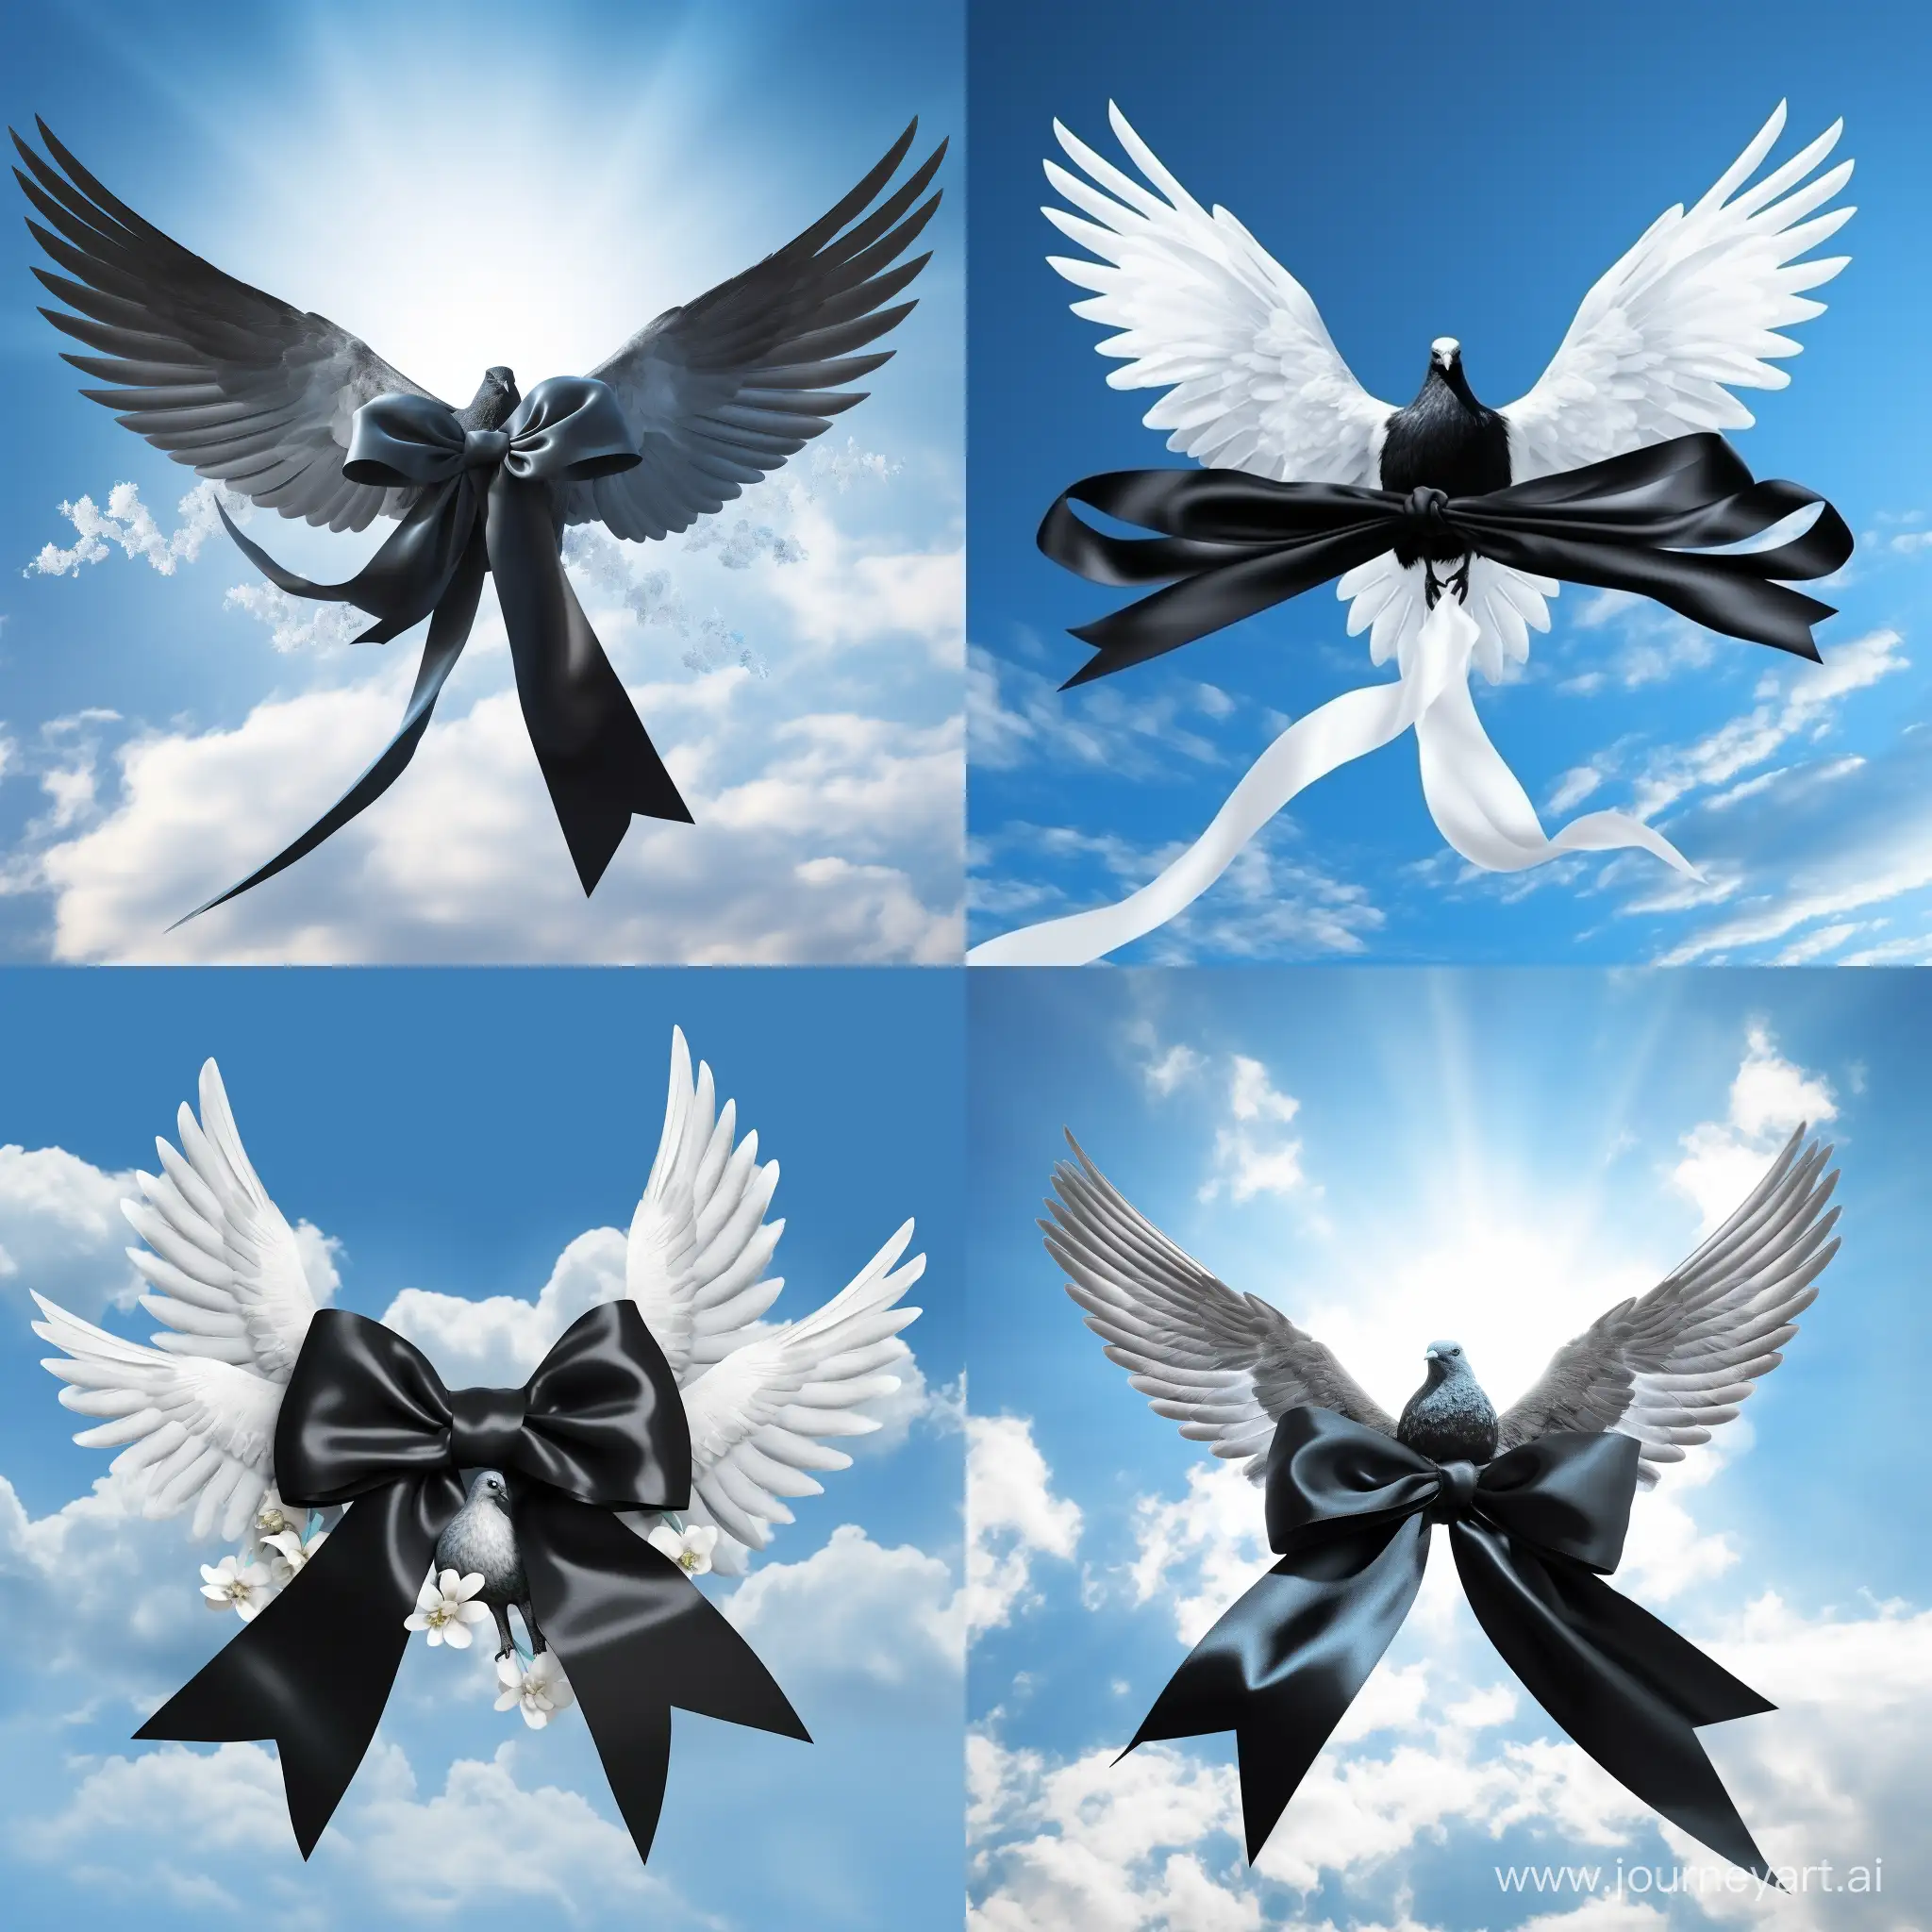 BLACK MOURNING BOW IN THE BLUE SKY WITH WHITE DOVES JESUS